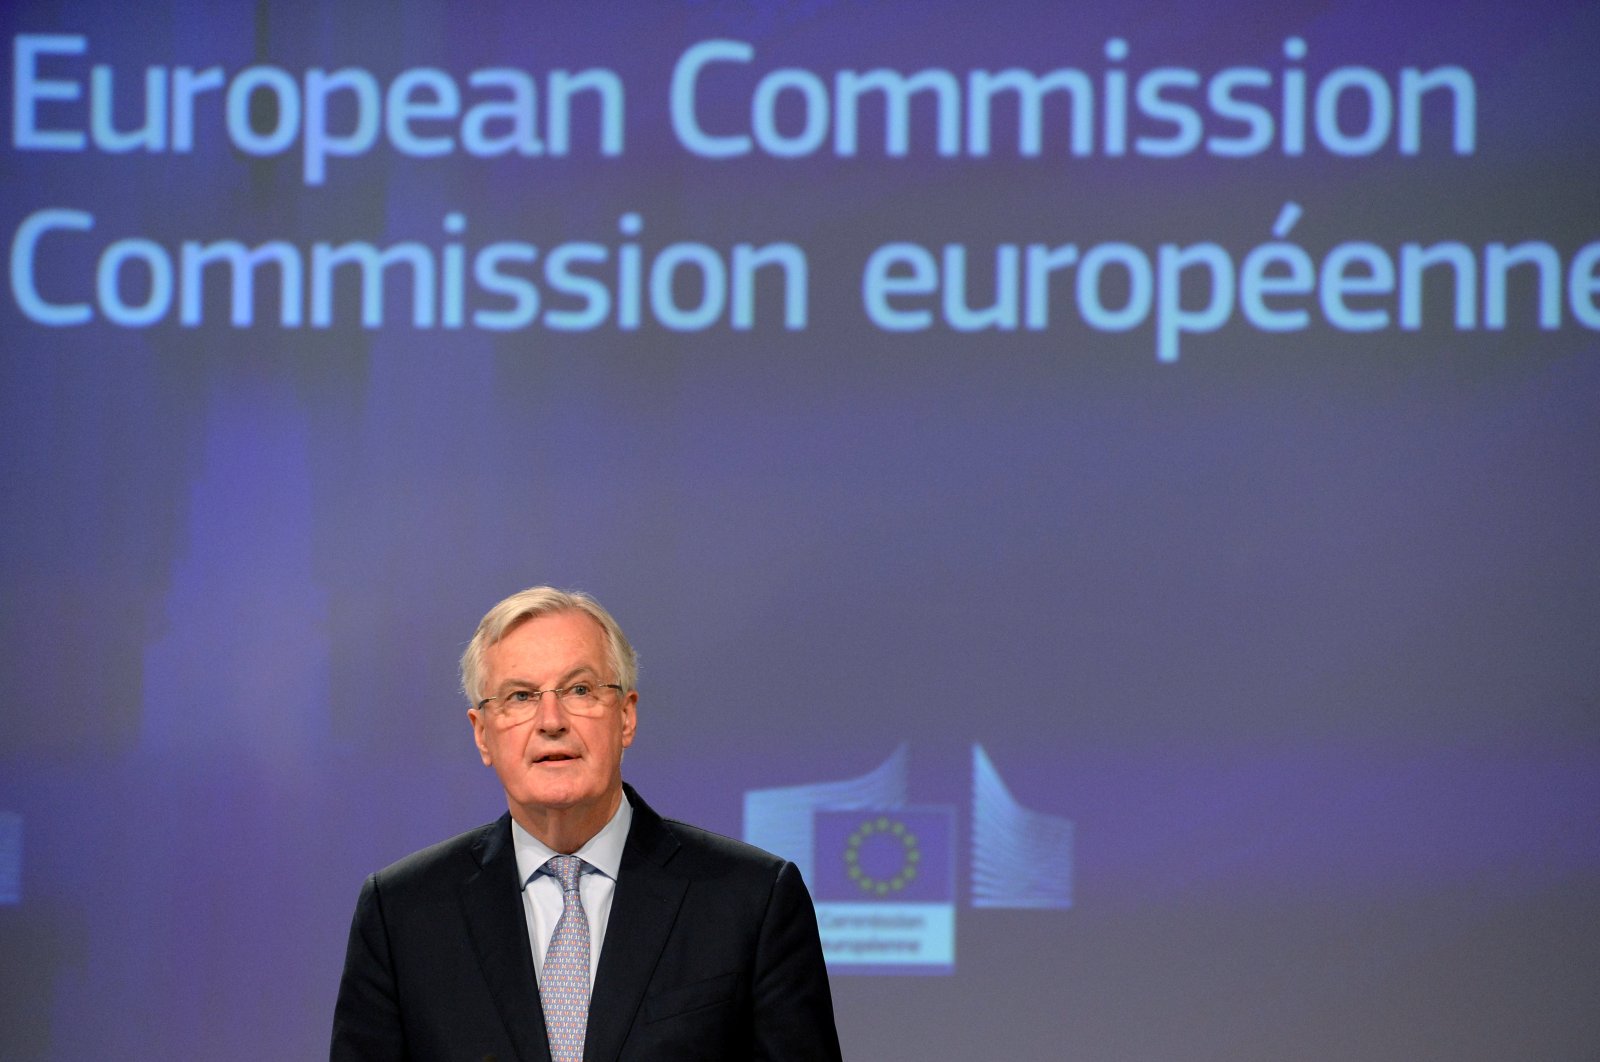 Michel Barnier, Brexit chief negotiator for Europe on future ties with Britain, speaks during a news conference after the first week of EU-U.K. negotiations, Brussels, March 5, 2020. (REUTERS Photo)